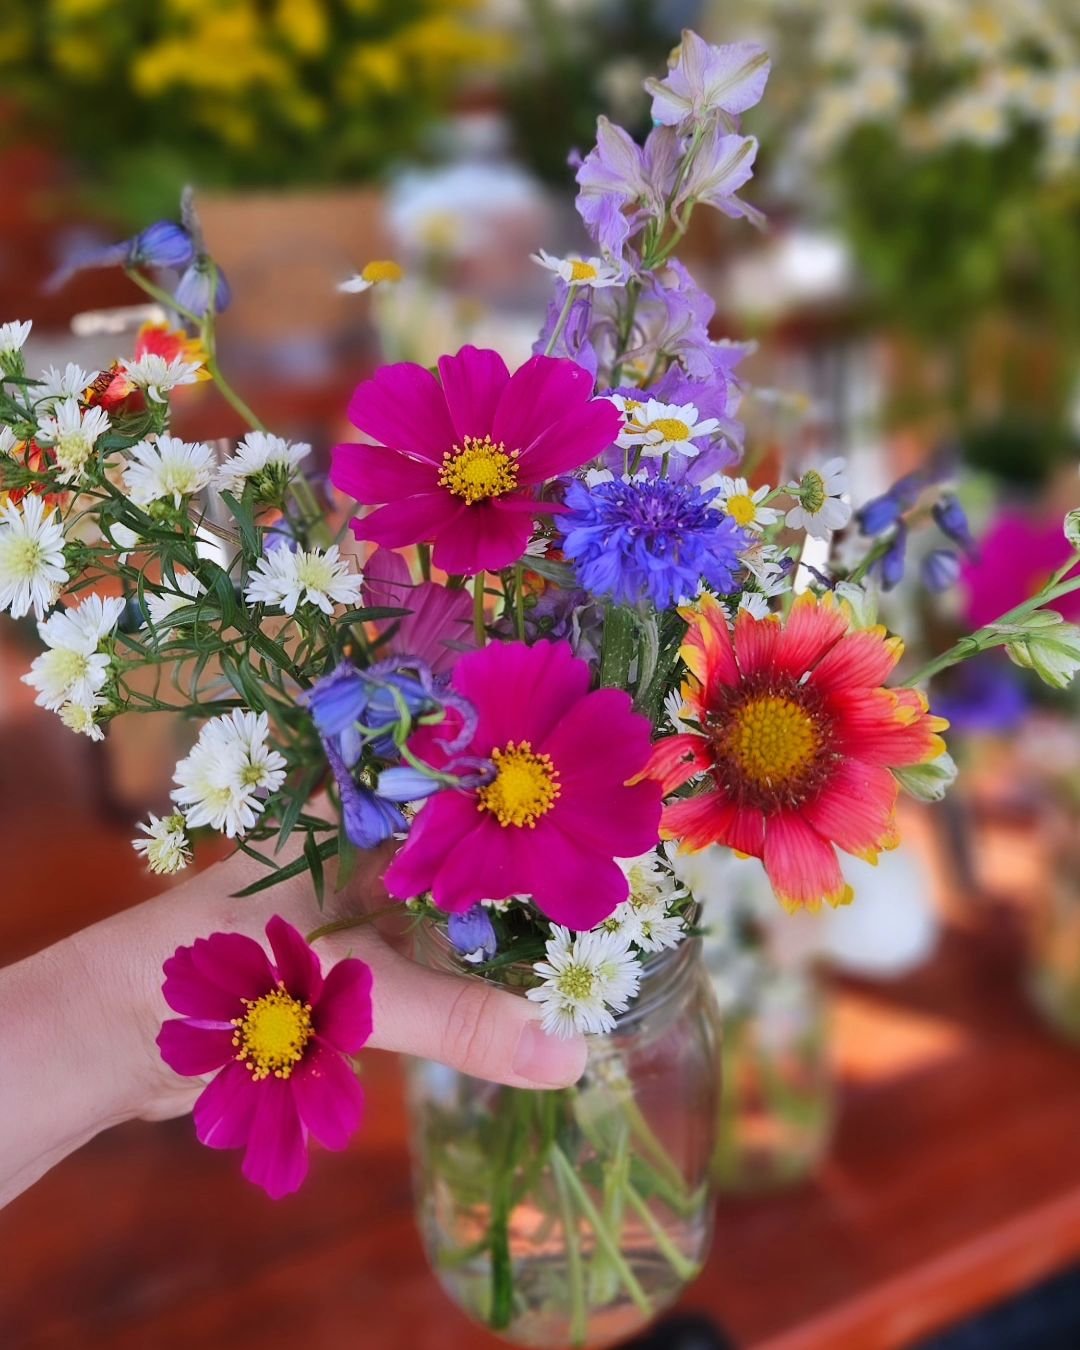 Excited for Saturday @newbraunfelsfarmersmarket ! 

Embrace the English countryside charm with our posy jar arrangements. These cuties bring life to every corner of your home. 🌸🌼

#farmersmarket #cutflowers #flowerfarm #creeksouthfarms #texasflower